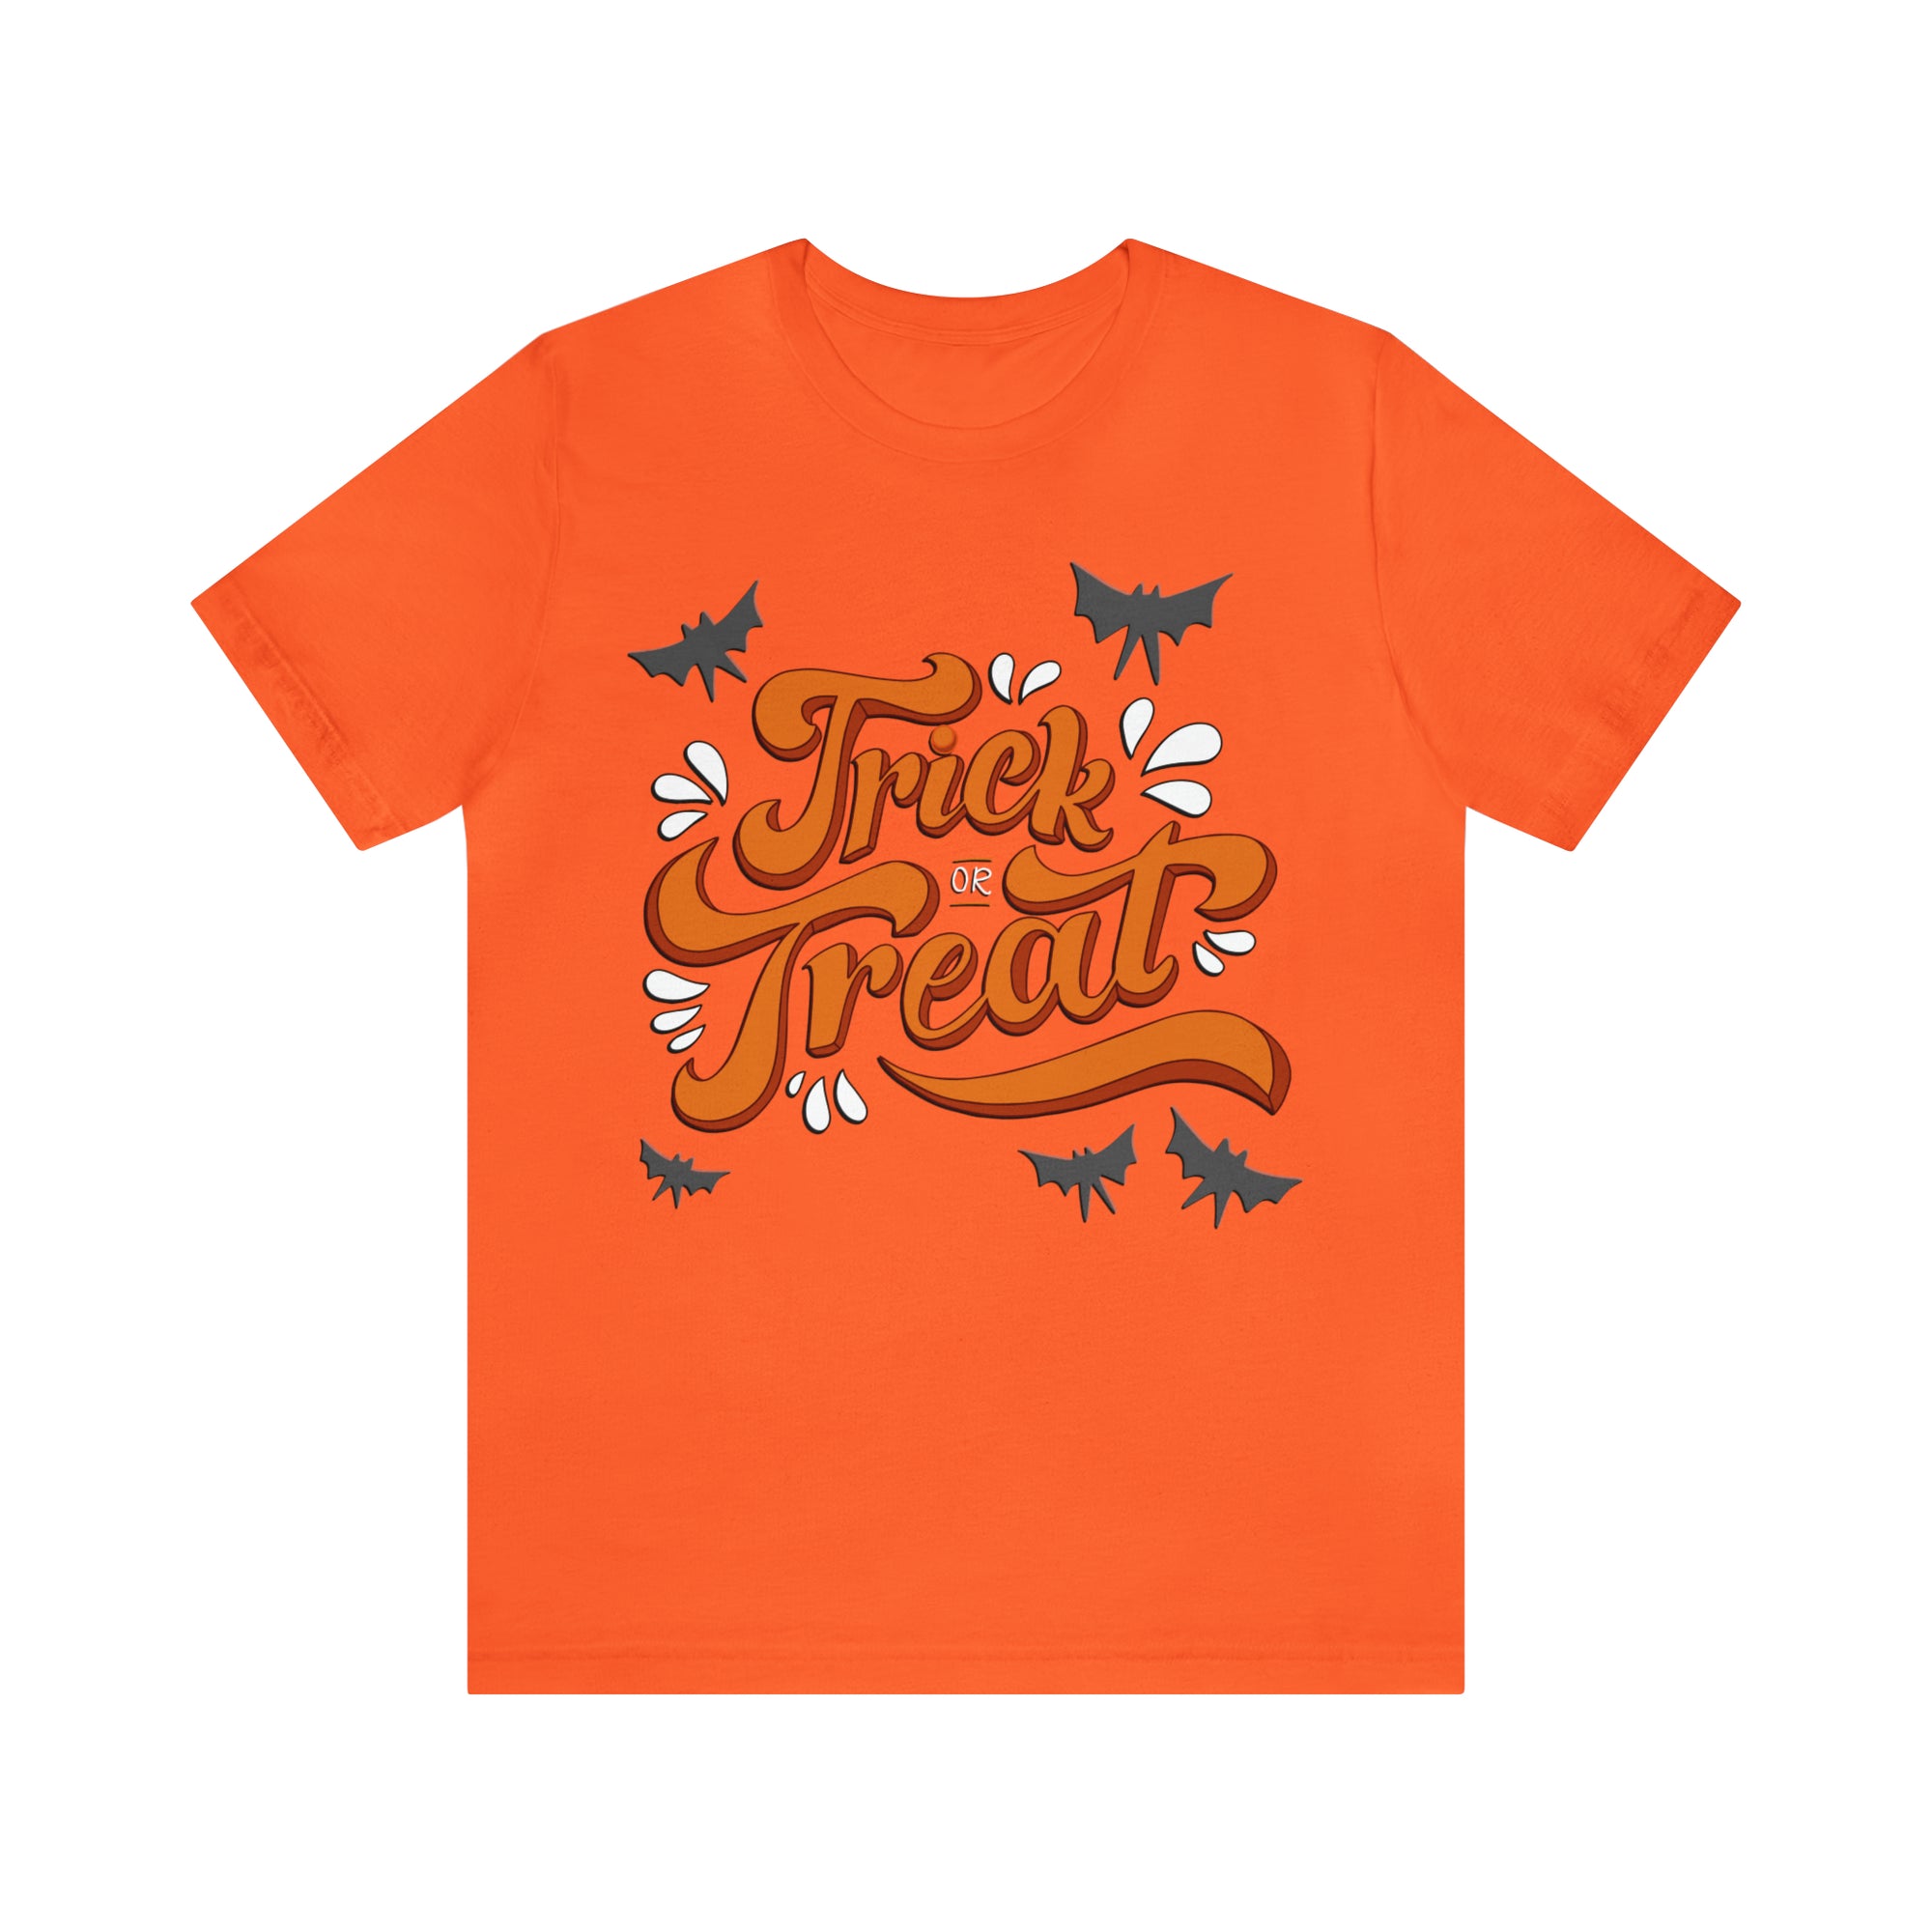 Spooktacular 'Trick or Treat' Halloween Graphic T-Shirt